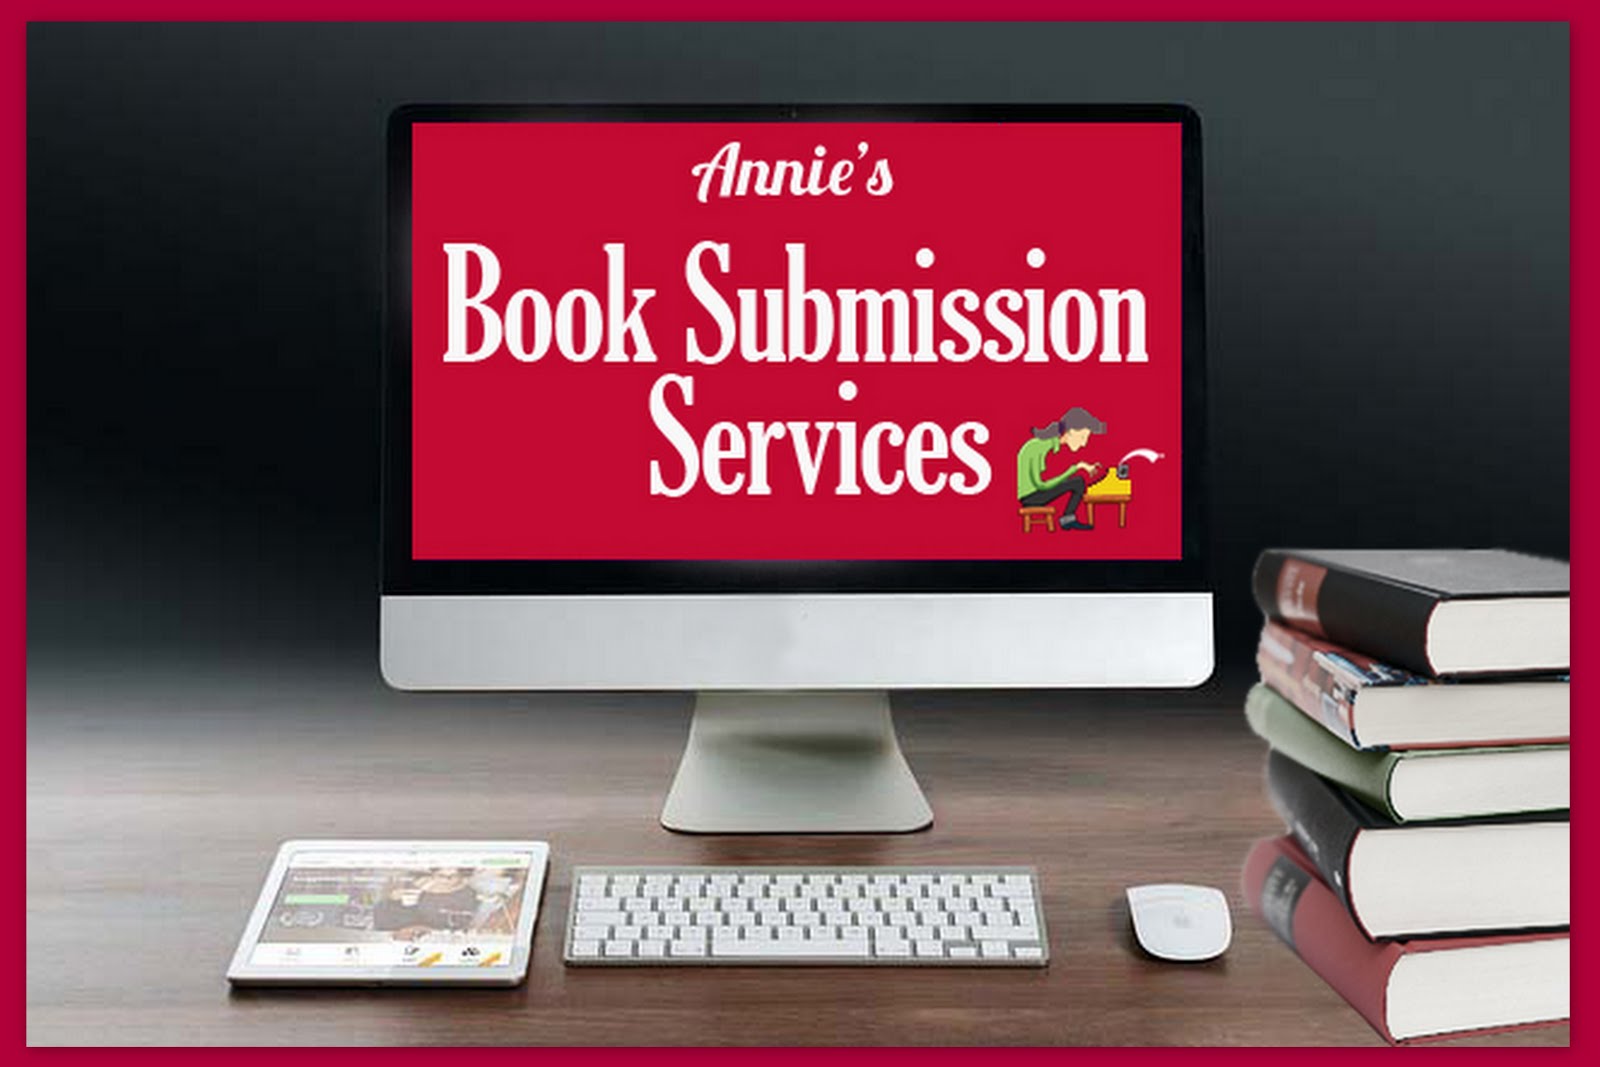 Annie's Book Submission Services